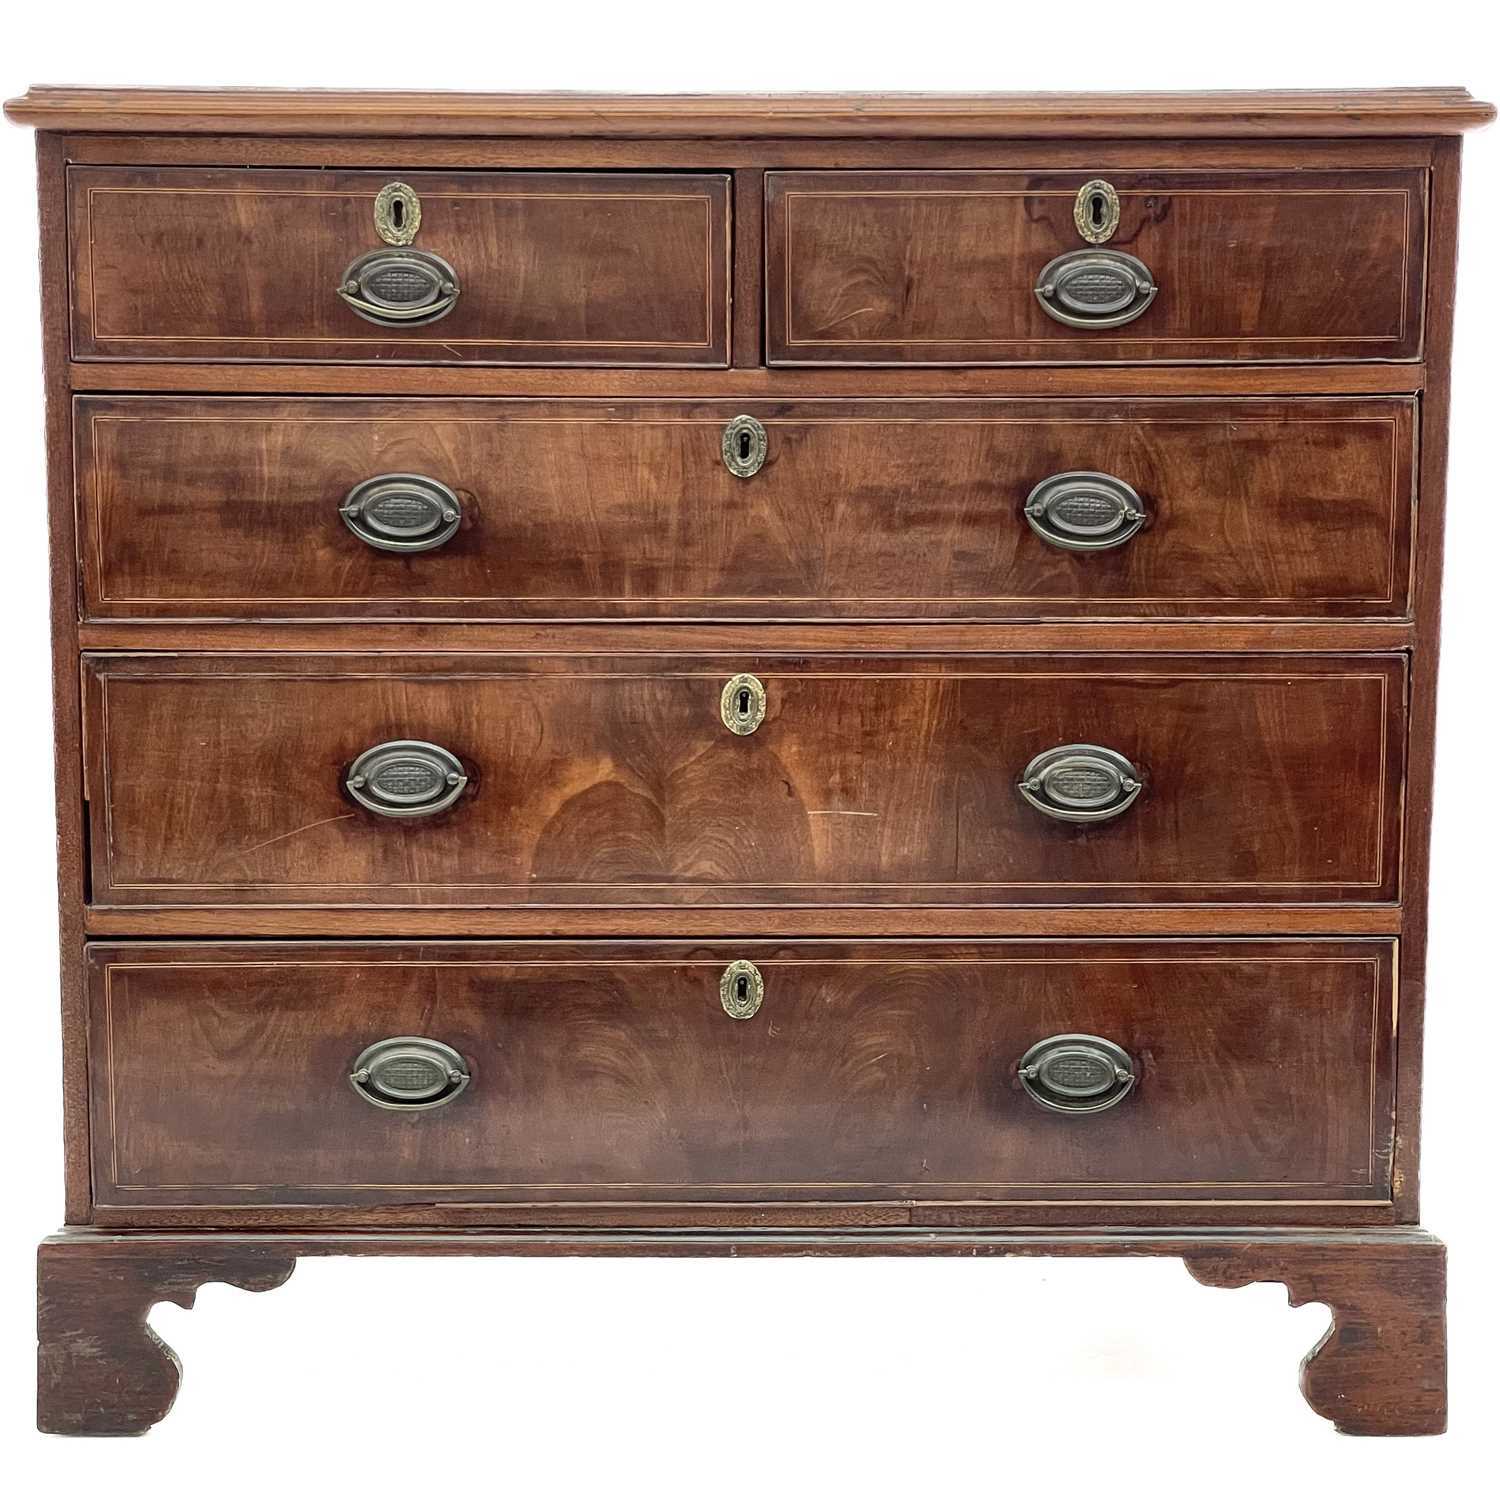 A George III mahogany chest. - Image 2 of 4